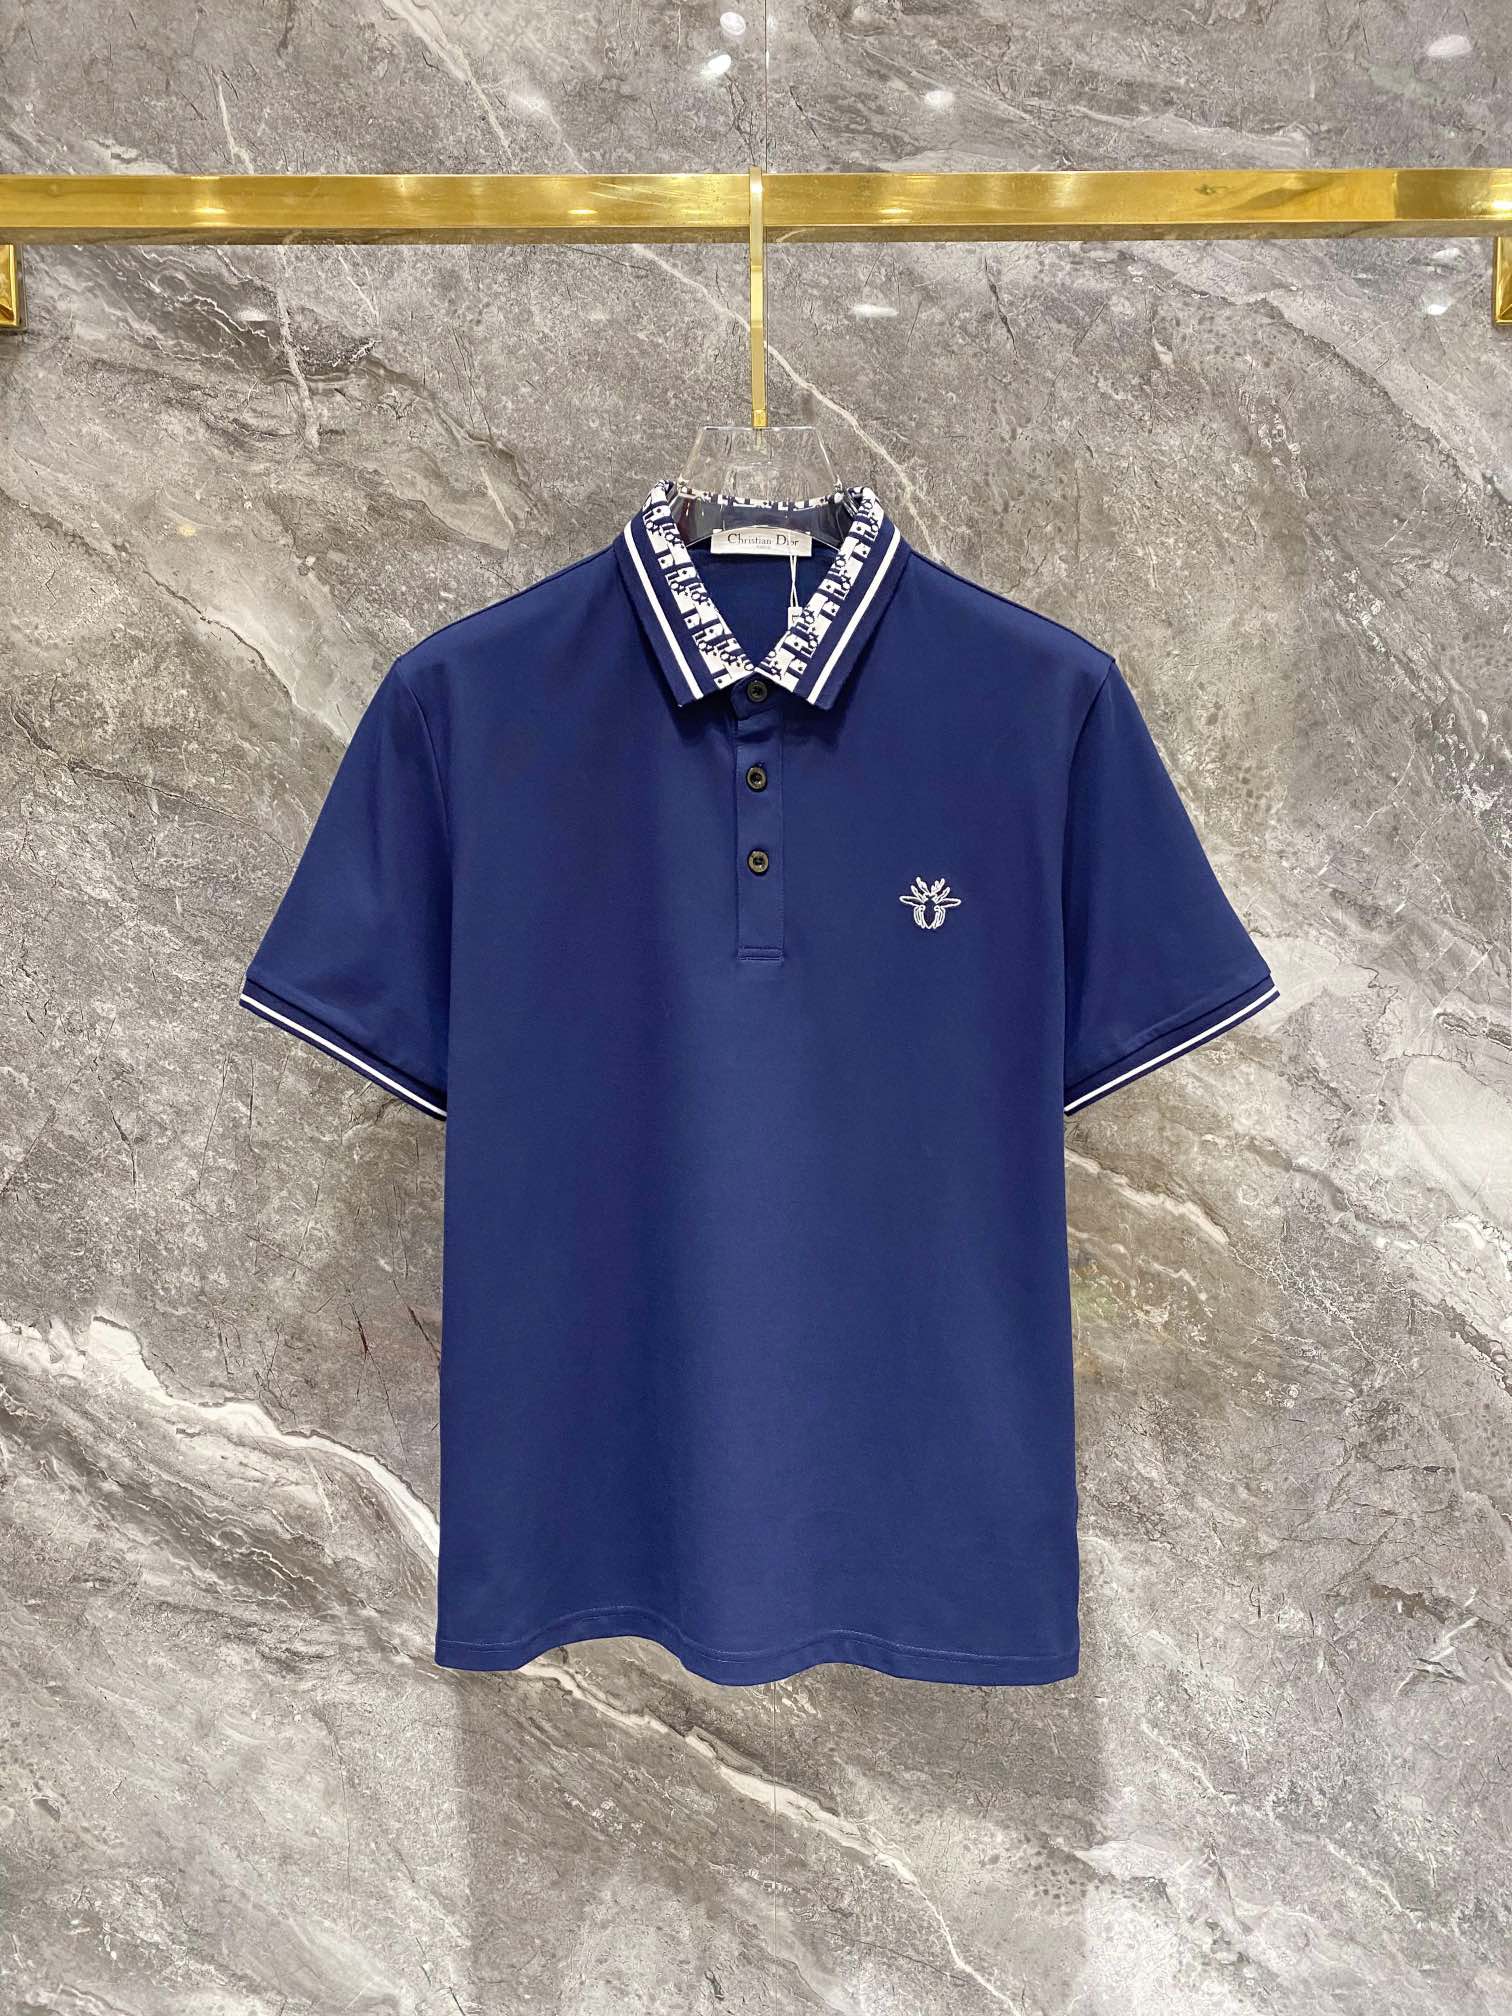 Dior Clothing Polo T-Shirt Blue White Embroidery Spring/Summer Collection Fashion